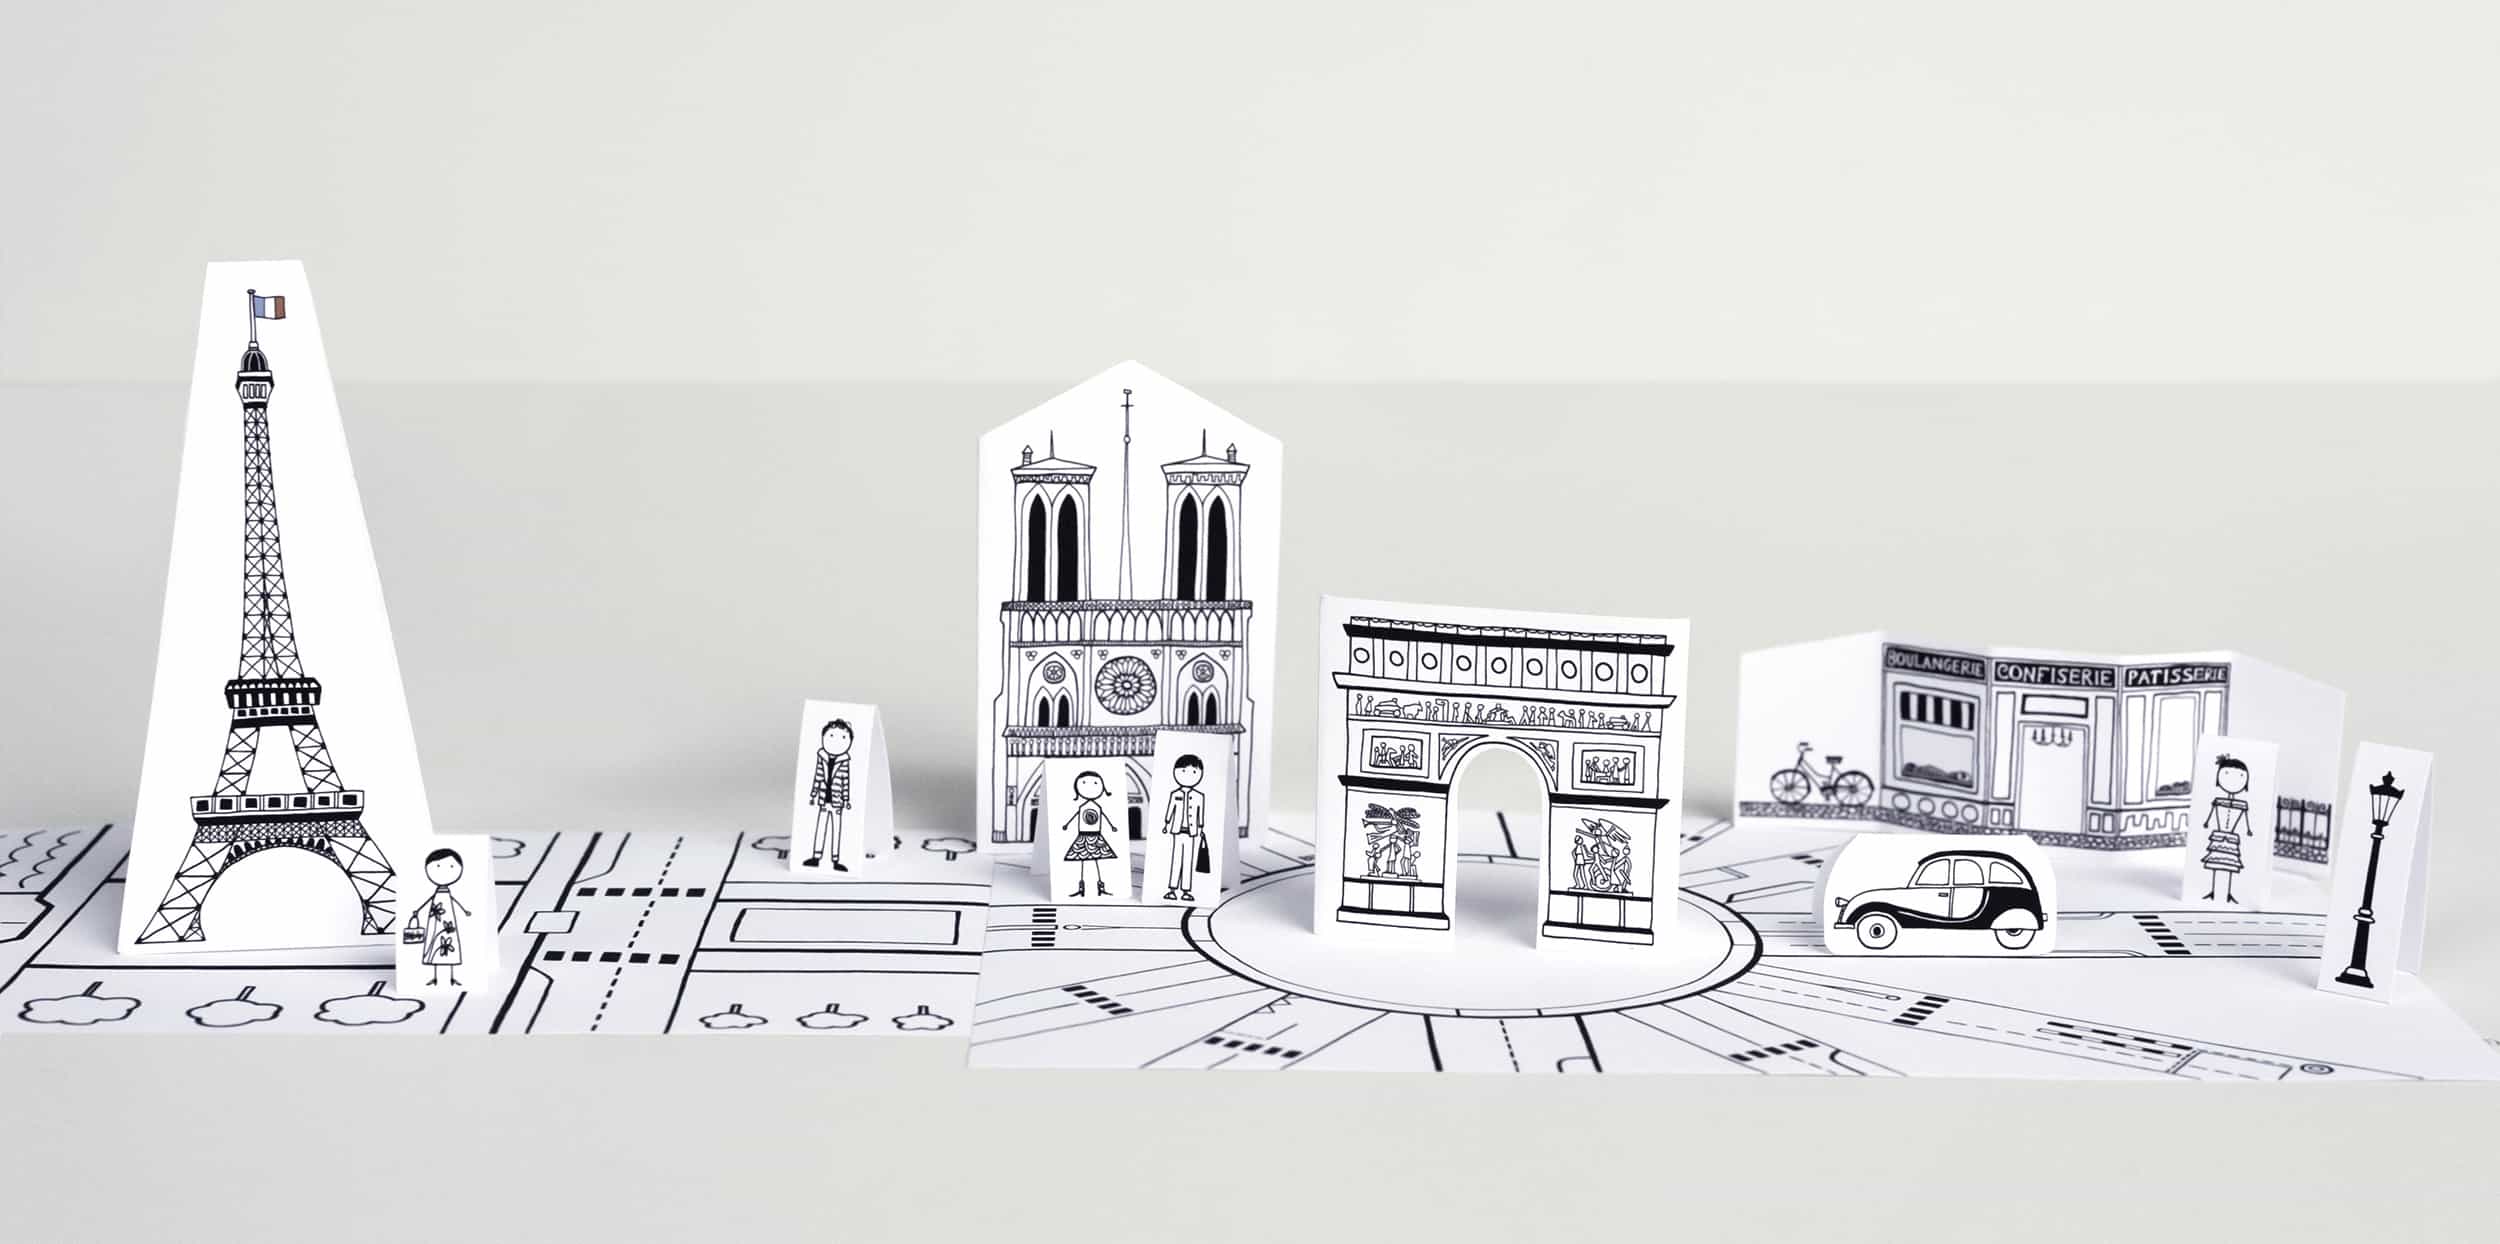 A model of Paris made out of paper